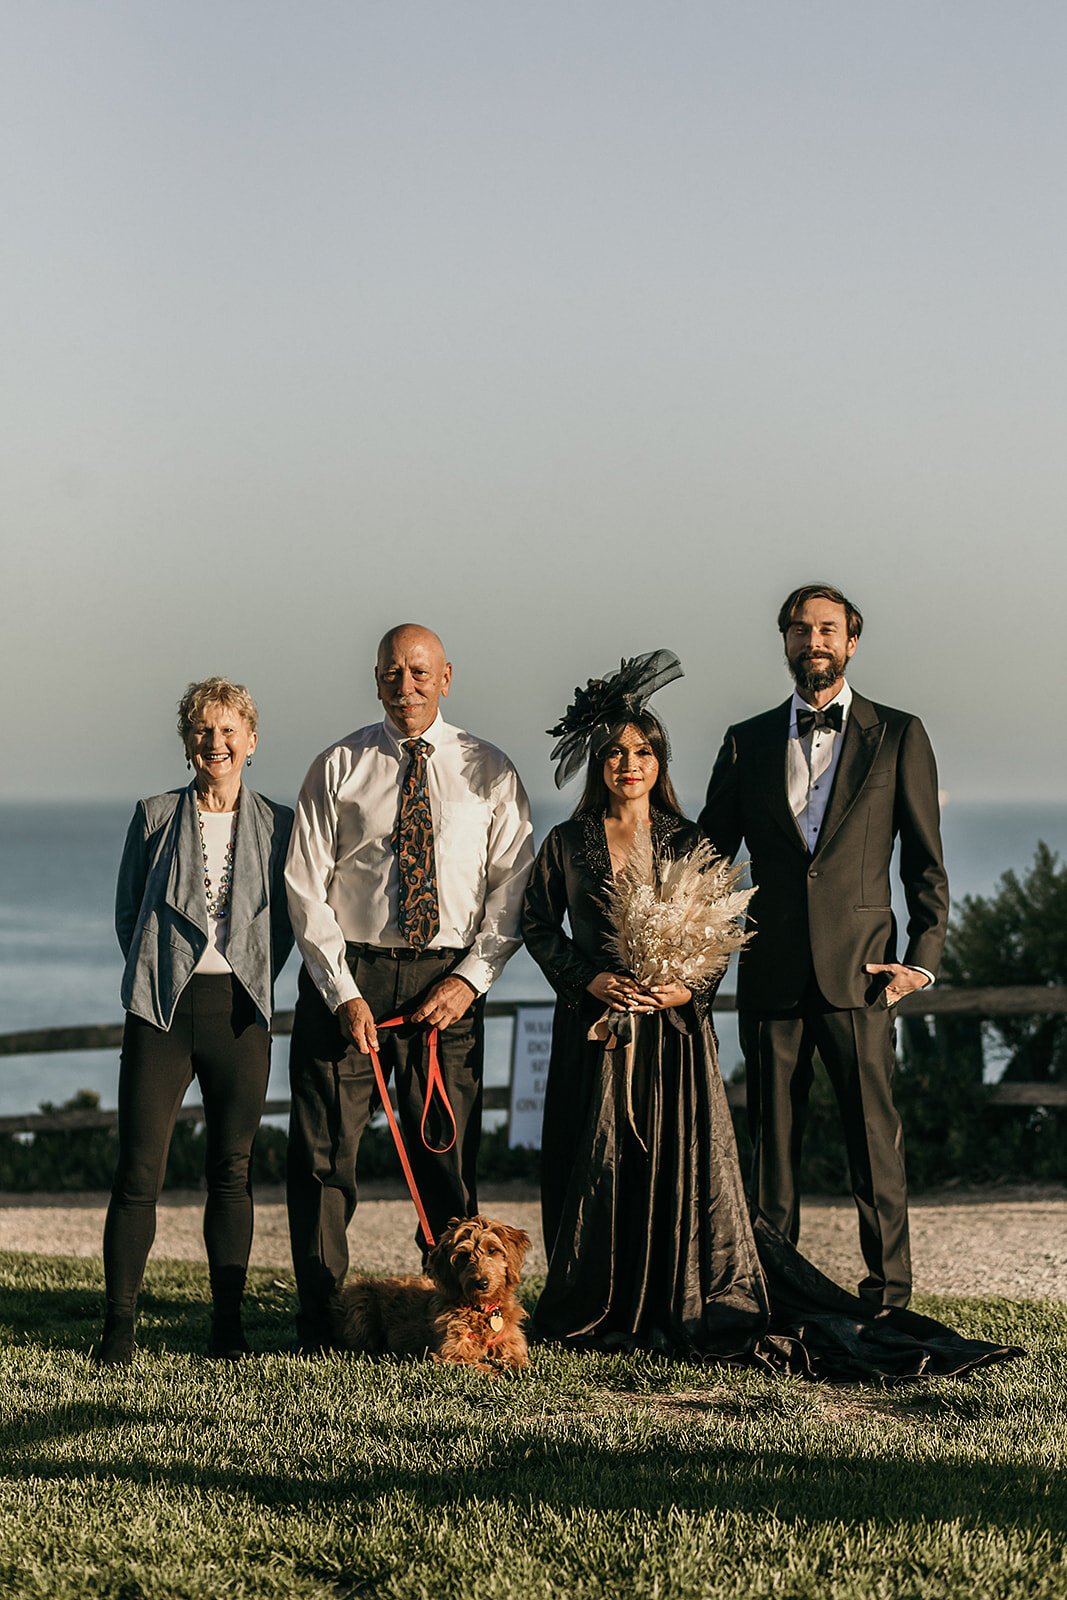 www.santabarbarawedding.com | Sarah Vendramini | The Ritz-Carlton Bacara | Lobo Floral | Mark Patterson | The Couple with Parents and Dog by The Ocean